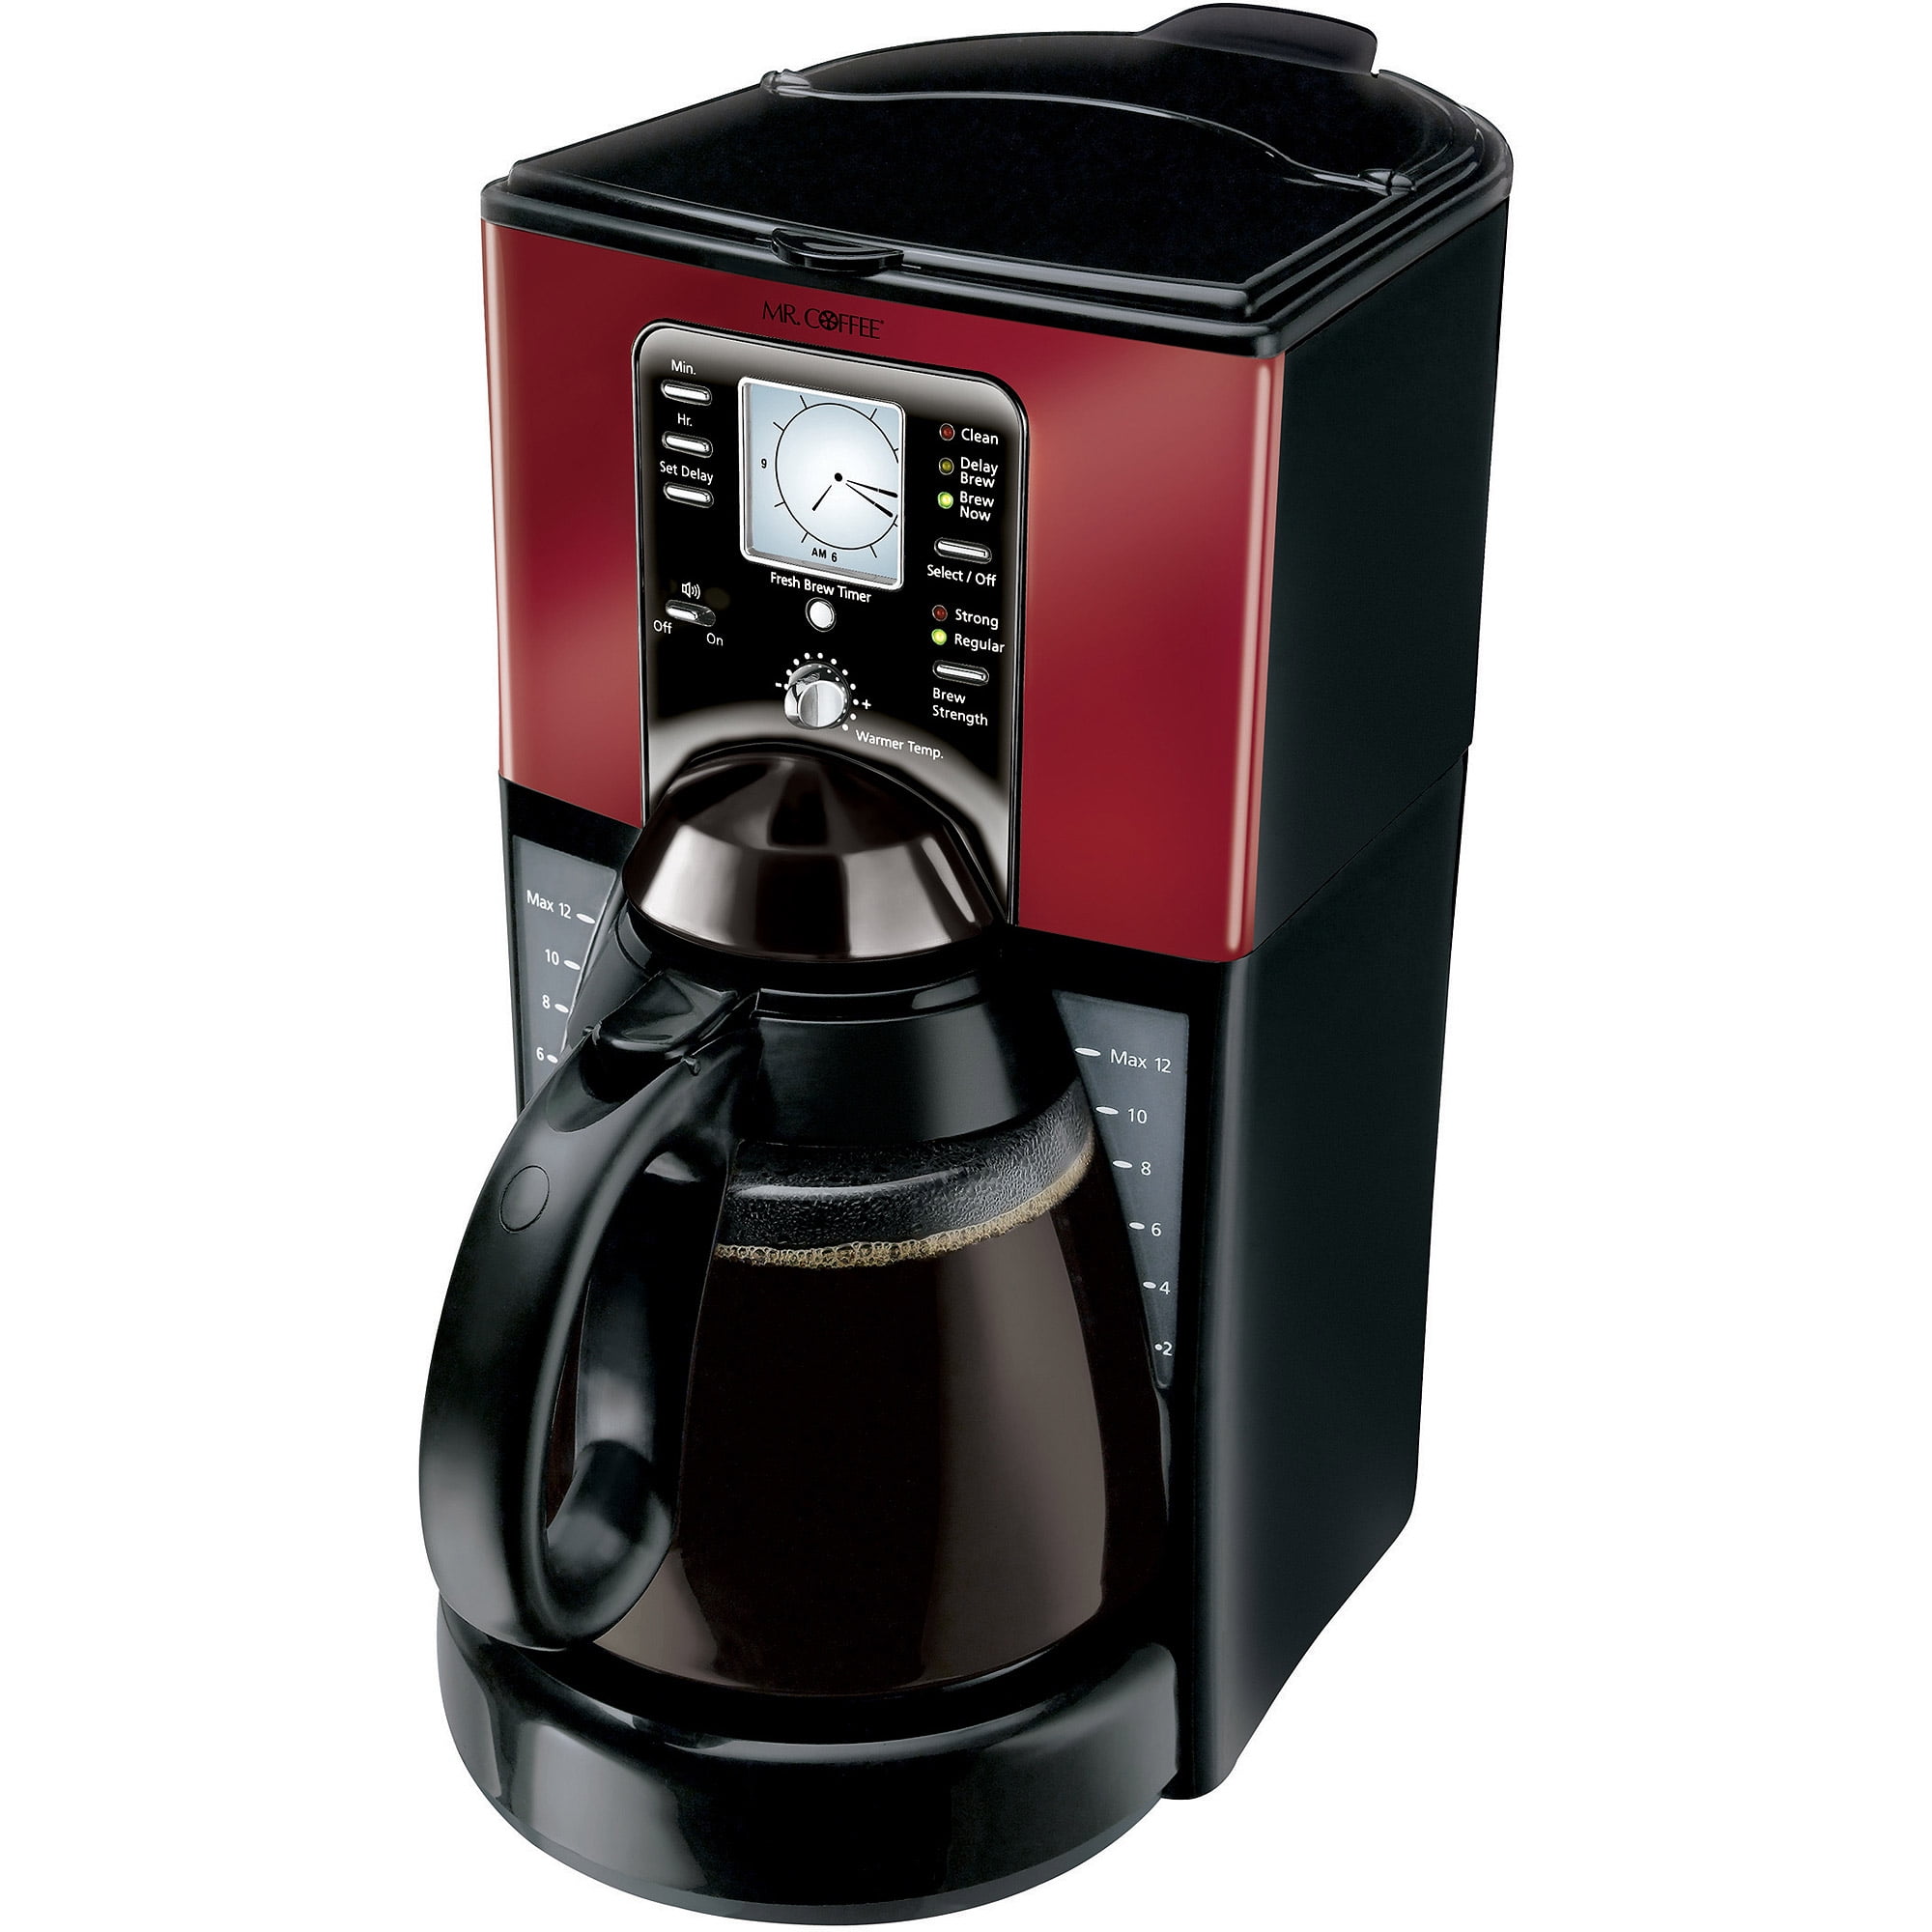 Mr. Coffee 12-cup Programable Coffee Maker Black/stainless Steel : Target